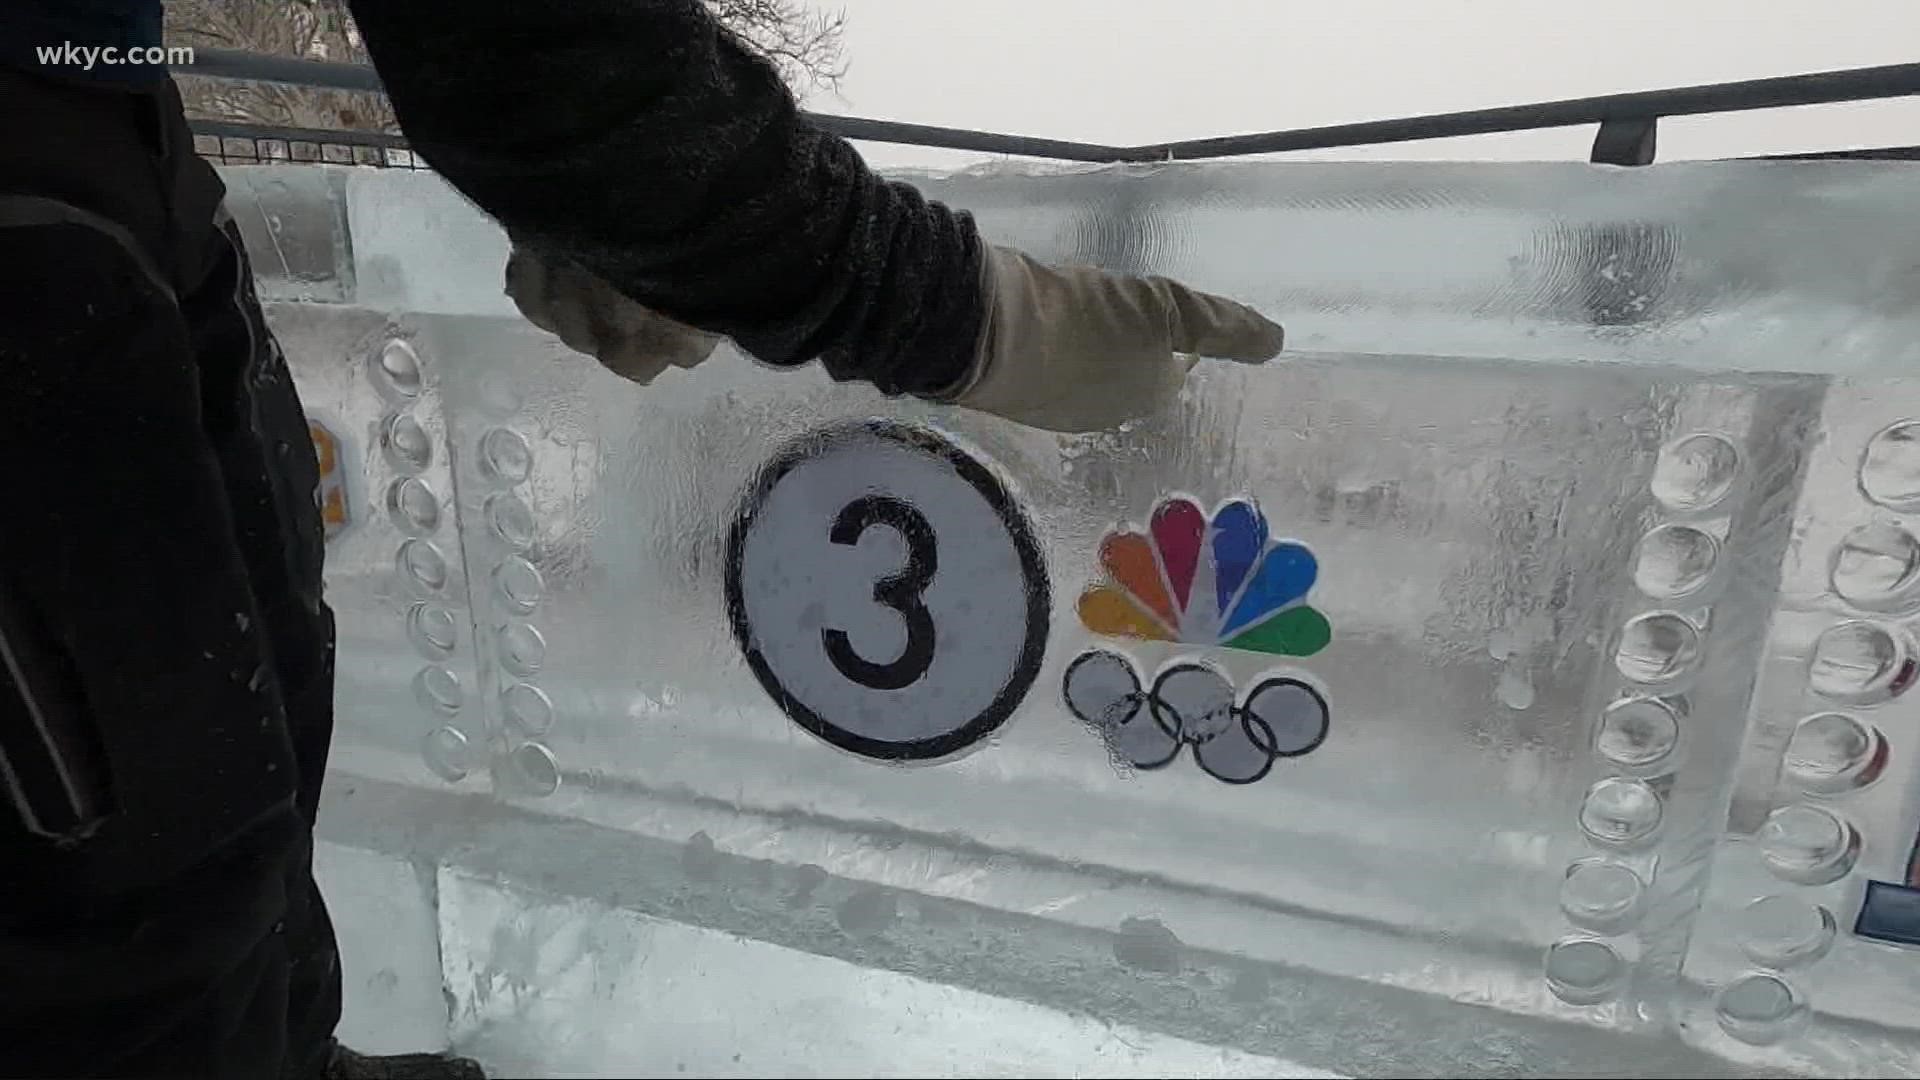 We couldn't have picked a better day for the return of 3News' Ice Desk!